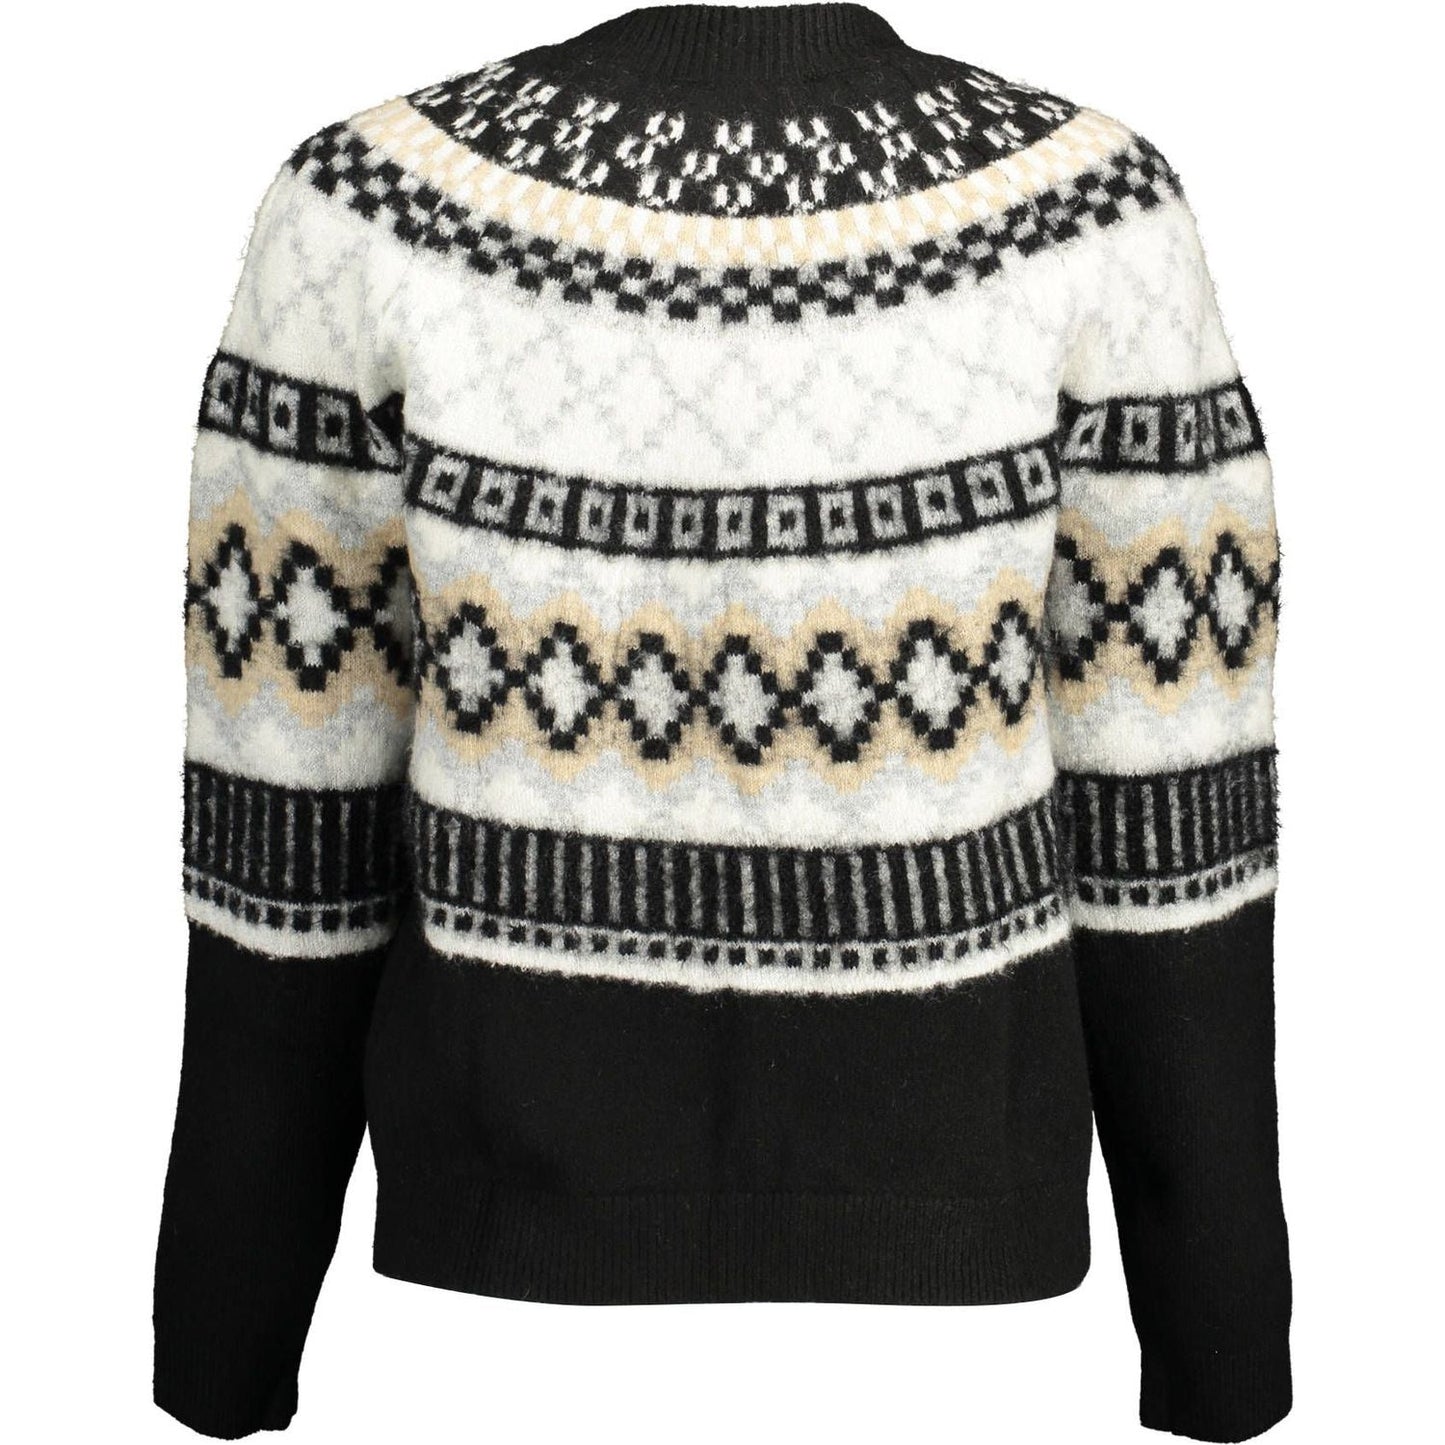 Desigual Chic Contrasting Detail Sweater chic-contrasting-detail-sweater